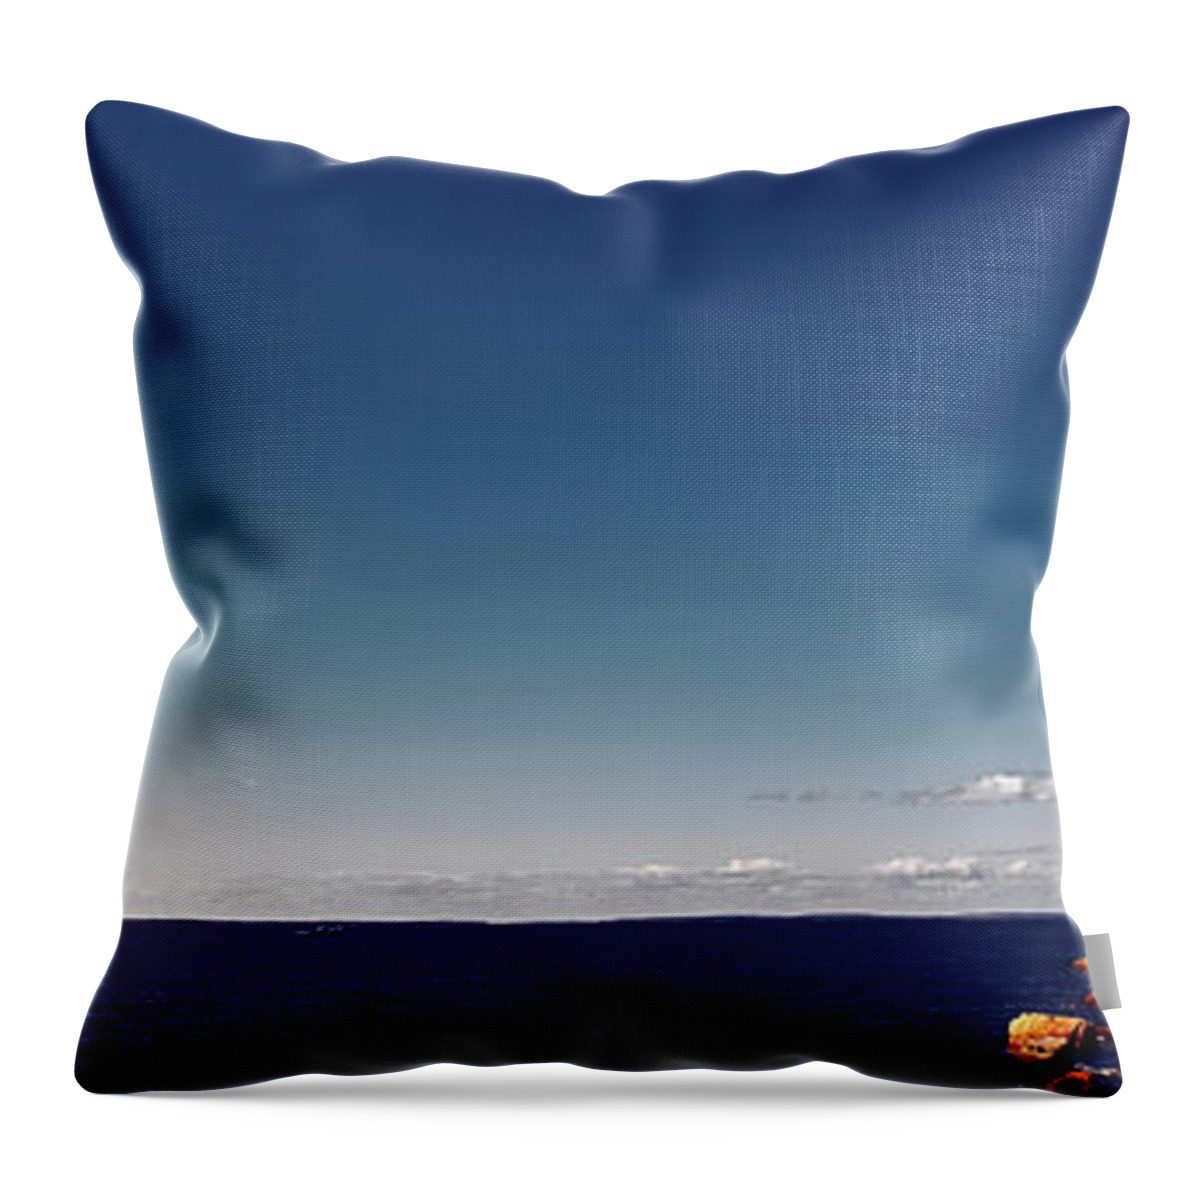  Acadia Throw Pillow featuring the photograph Acadia, National Park, Light House, Maine by Tom Jelen